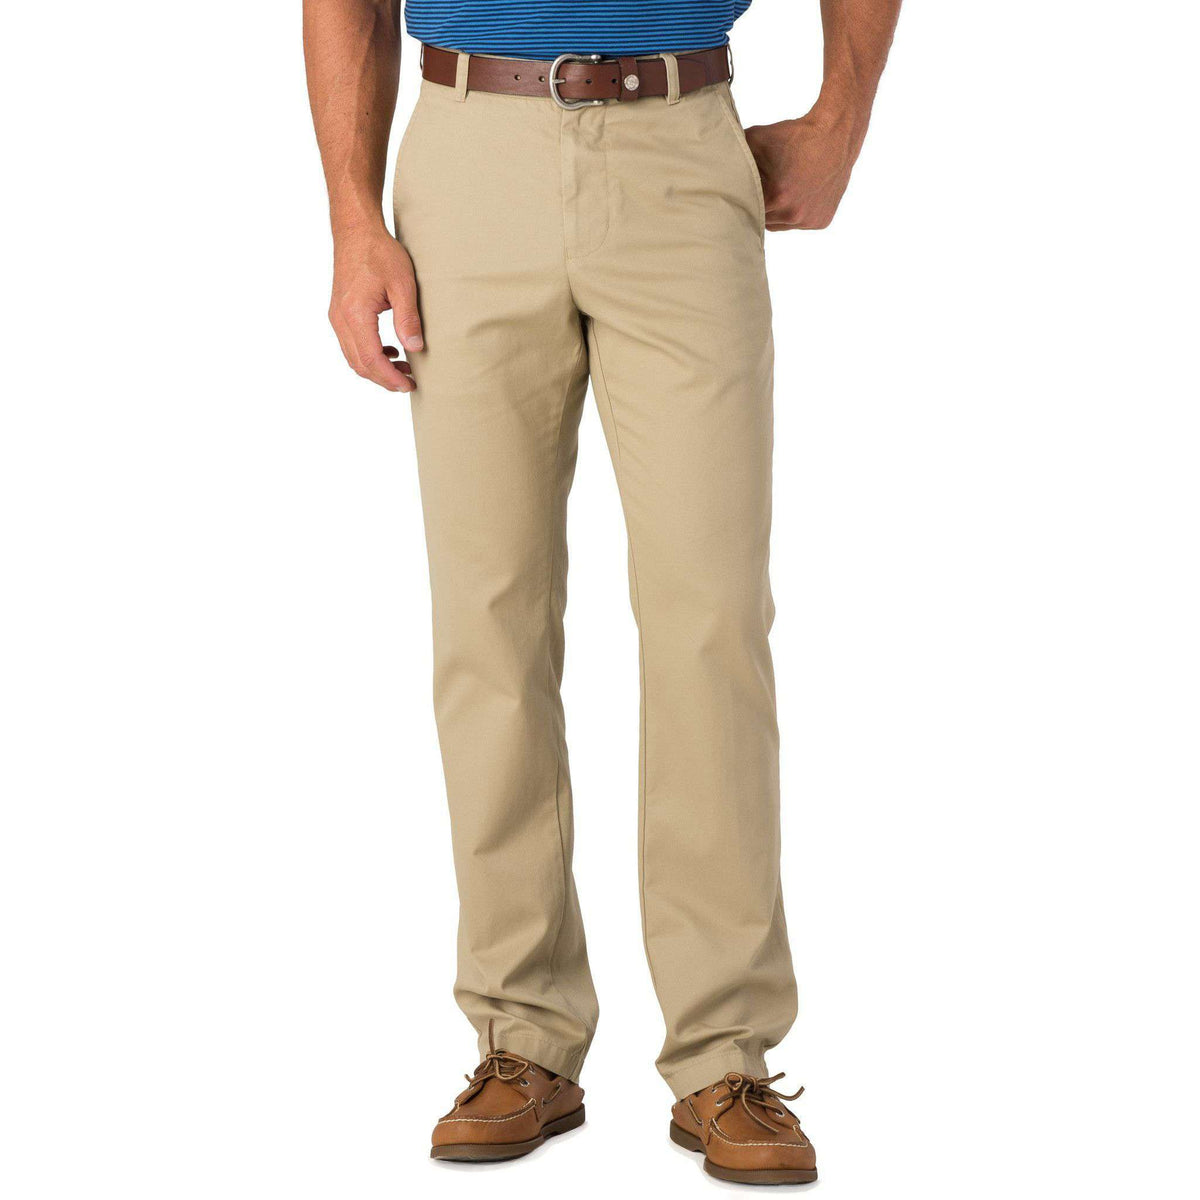 Skipjack Classic Fit Pant in Sandstone Khaki by Southern Tide - Country Club Prep